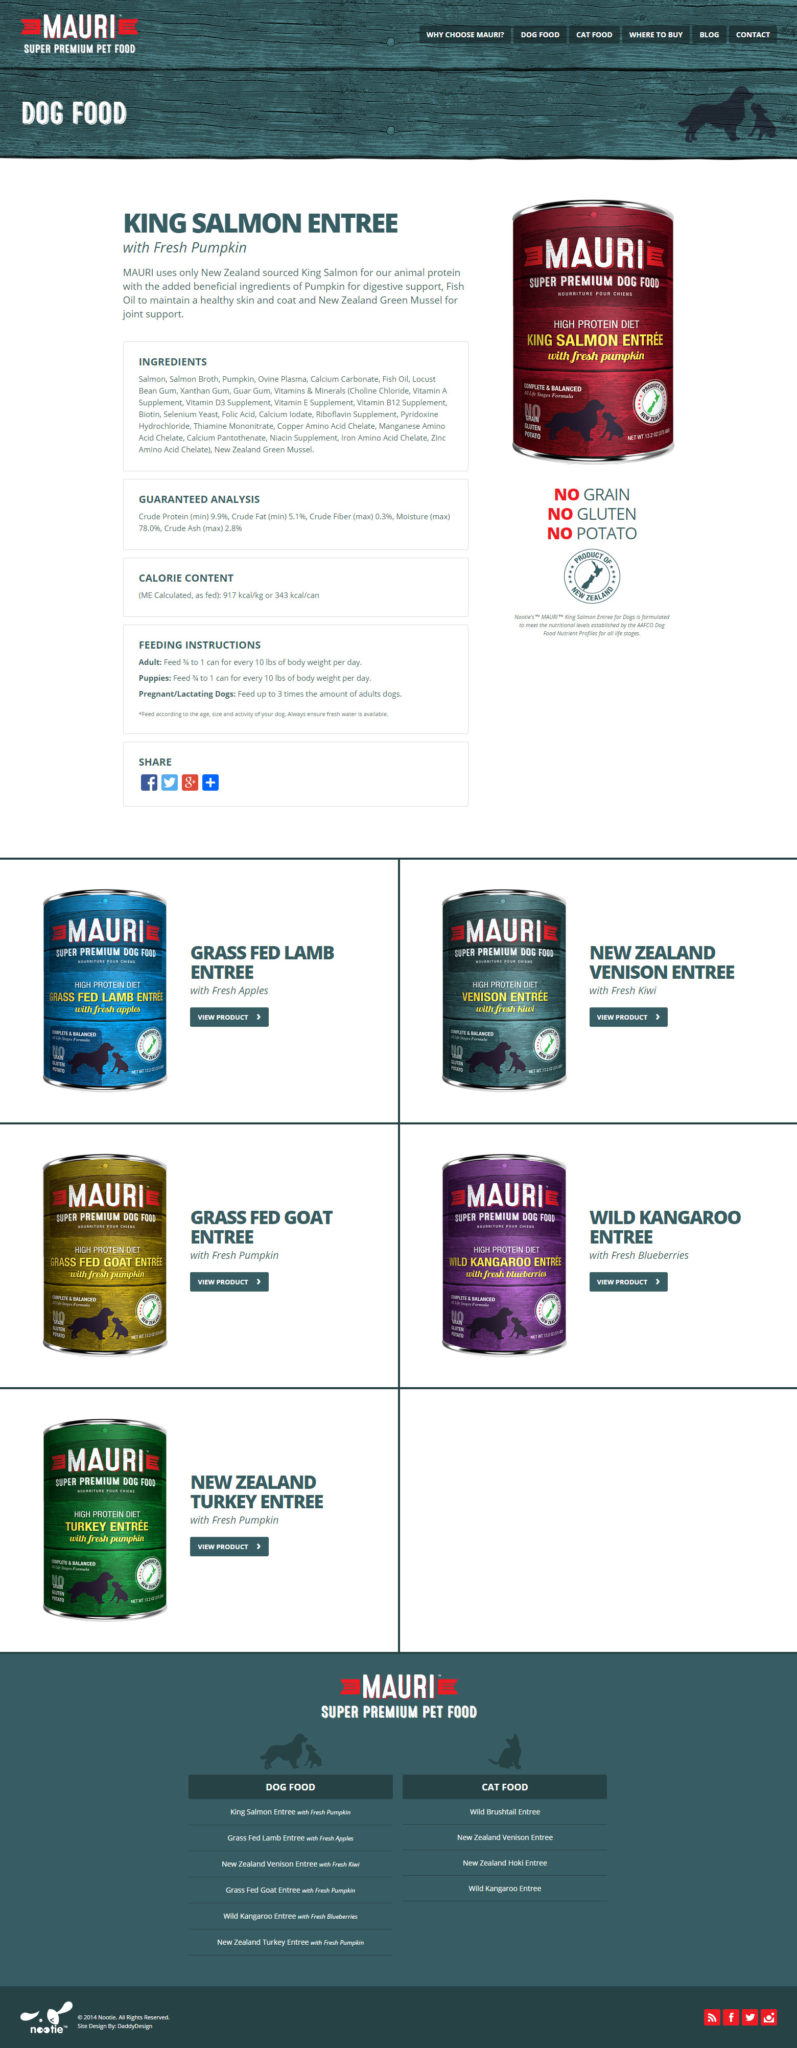 Dog Food Product Page Layout